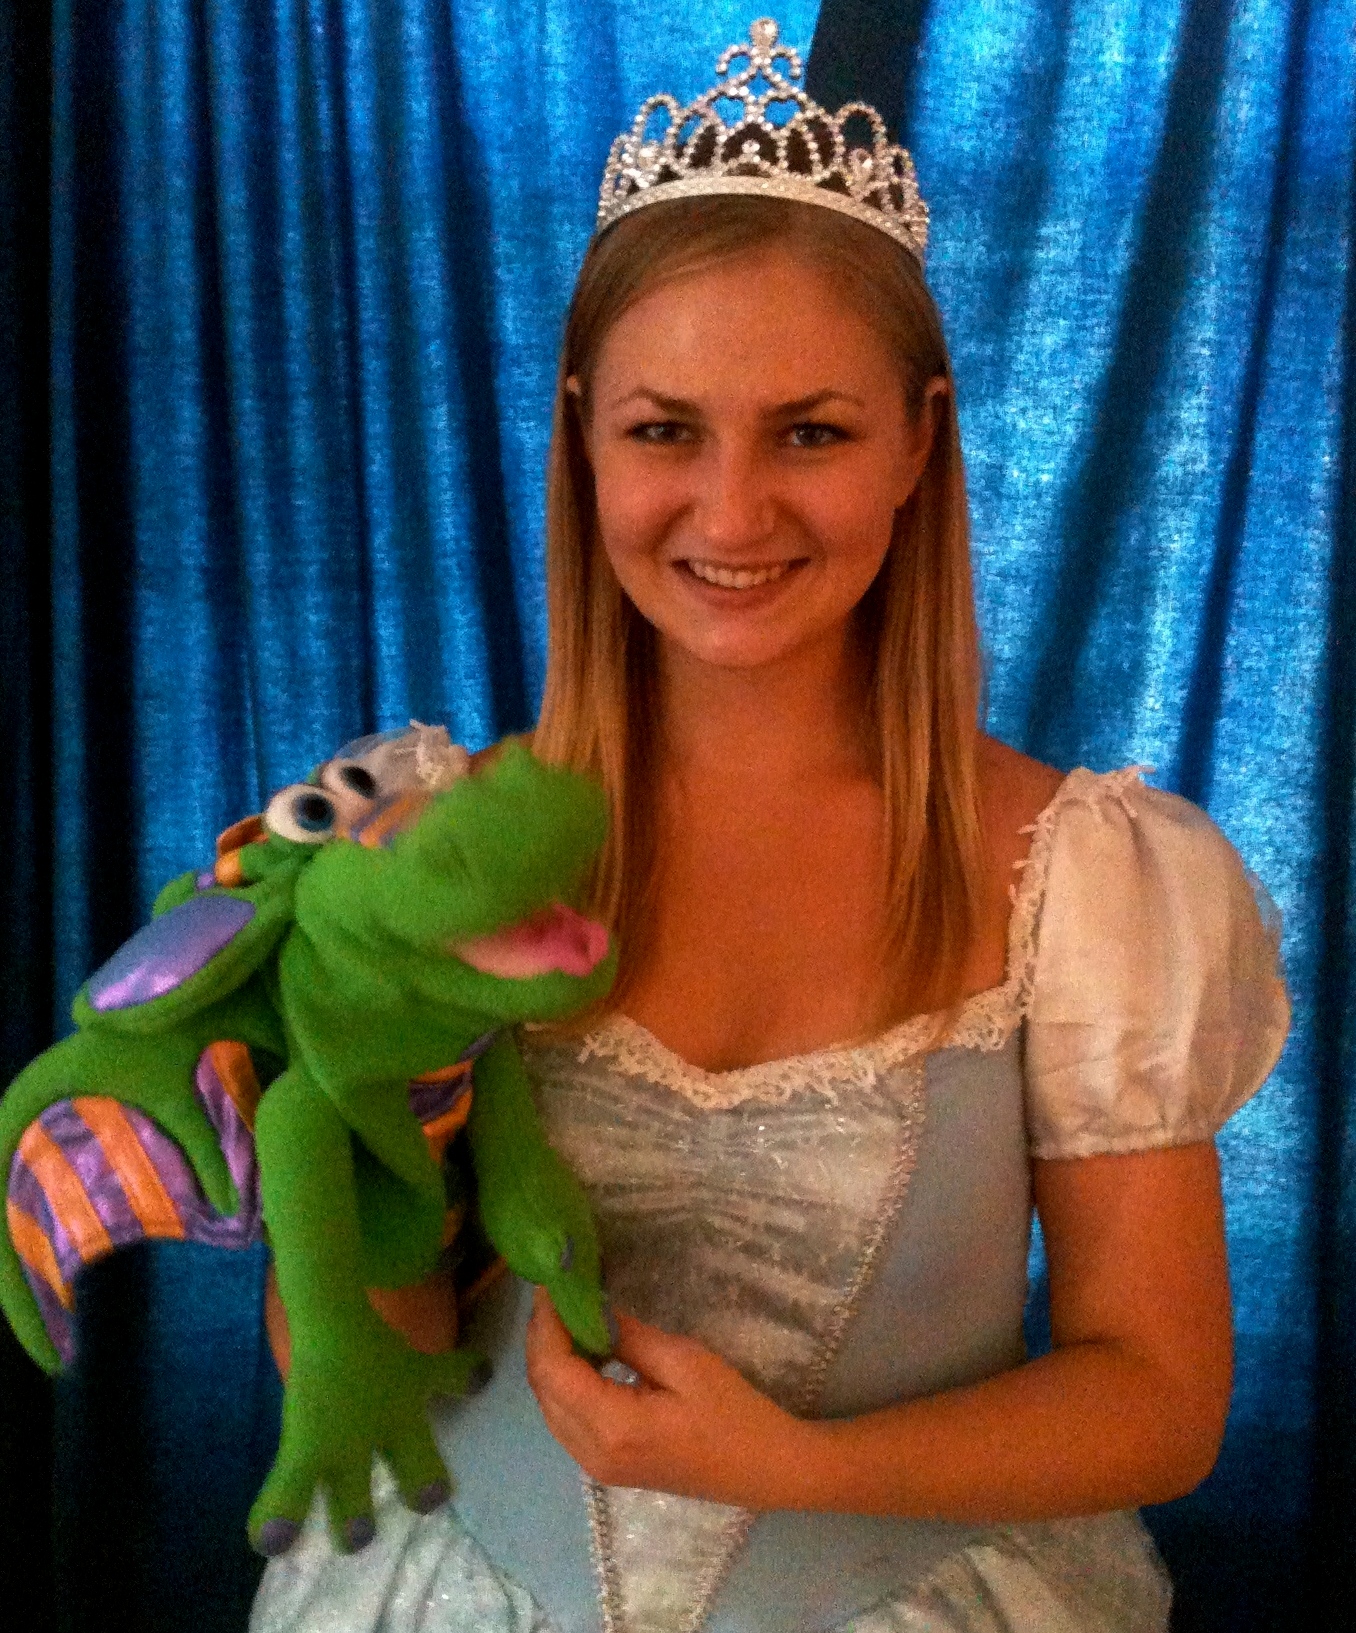 New York, princess, nora, dragon, princess party, theme party, entertainer, cinderella, puppet show, party planning, party ideas, boston entertainers, los angeles, miami, new york, new jersey